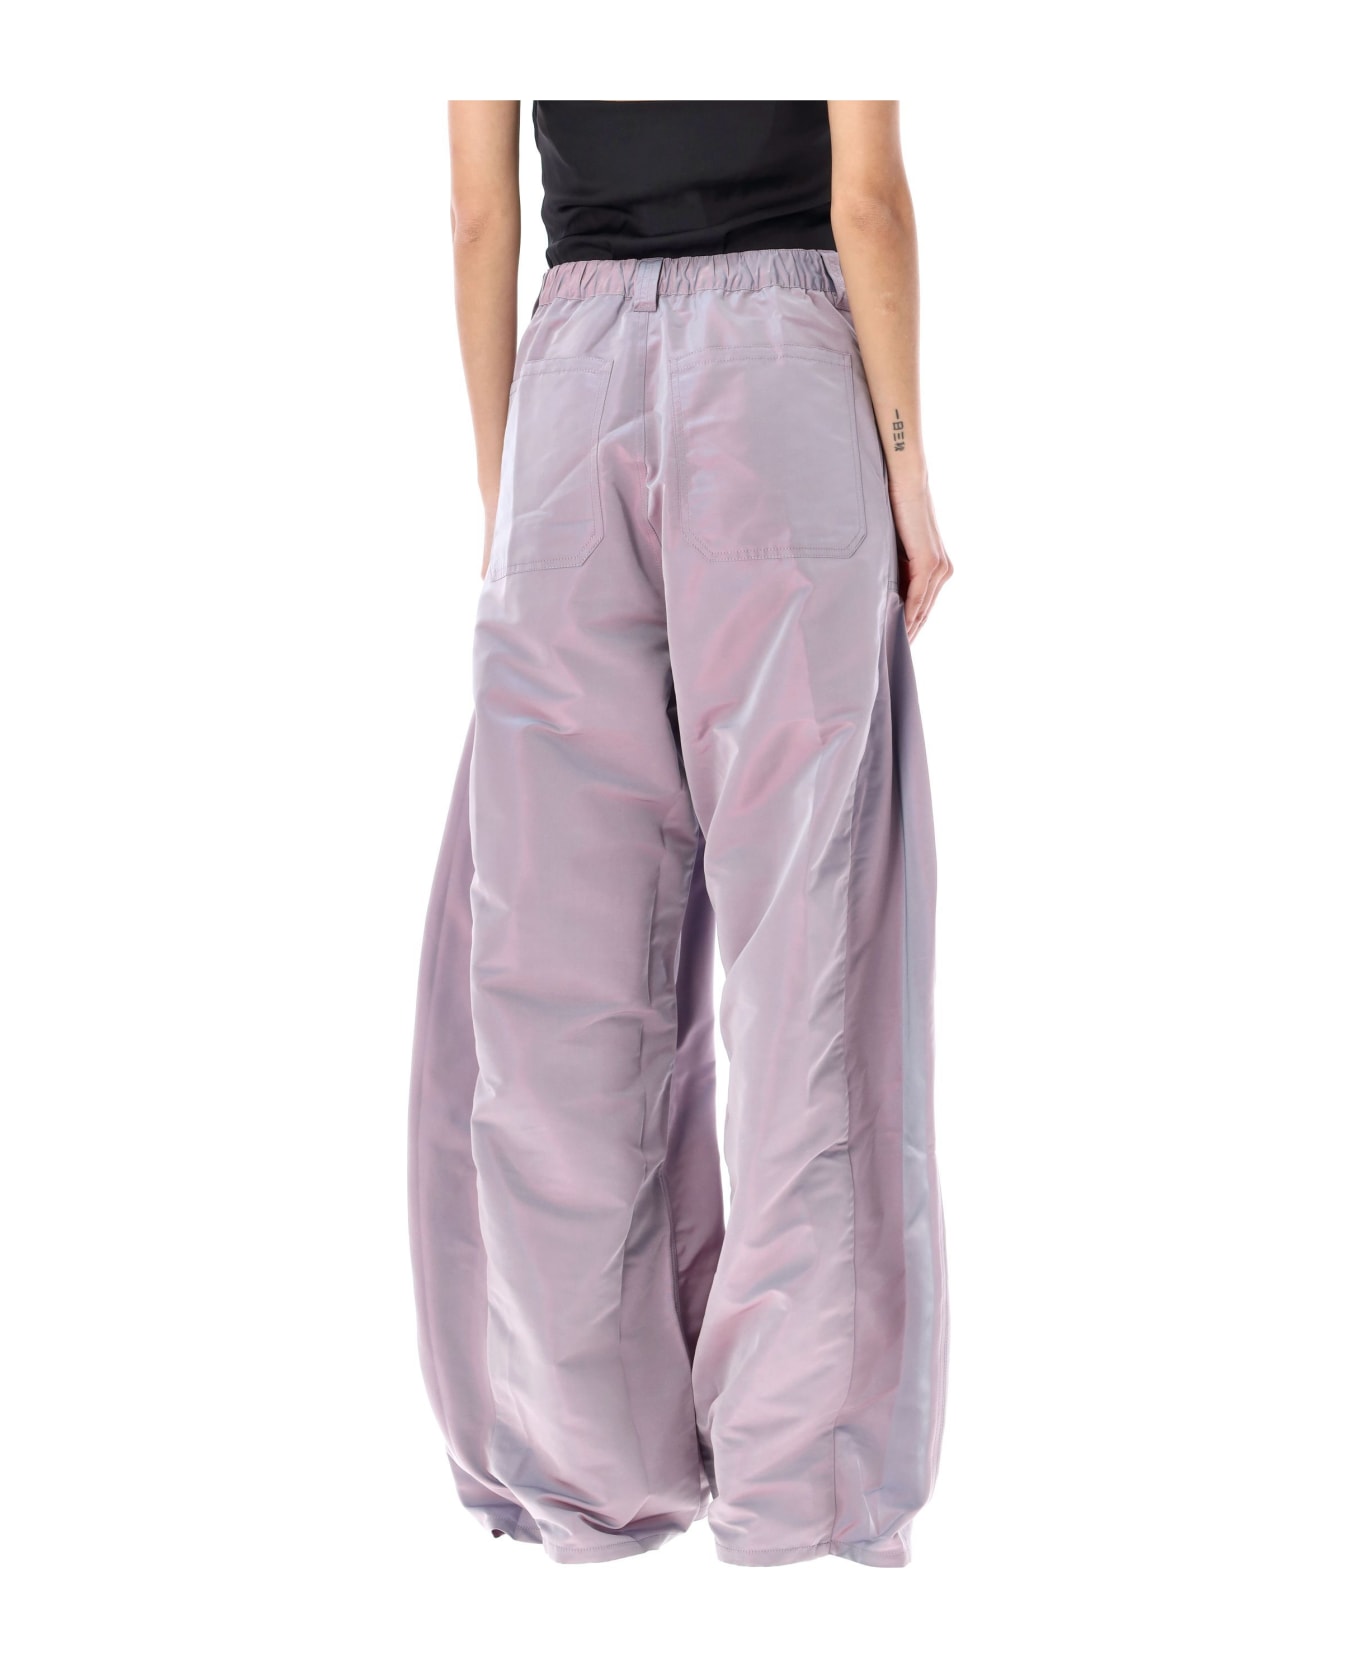 Y/Project Iridescent Pop-up Pants - IRIDESCENT LILAC